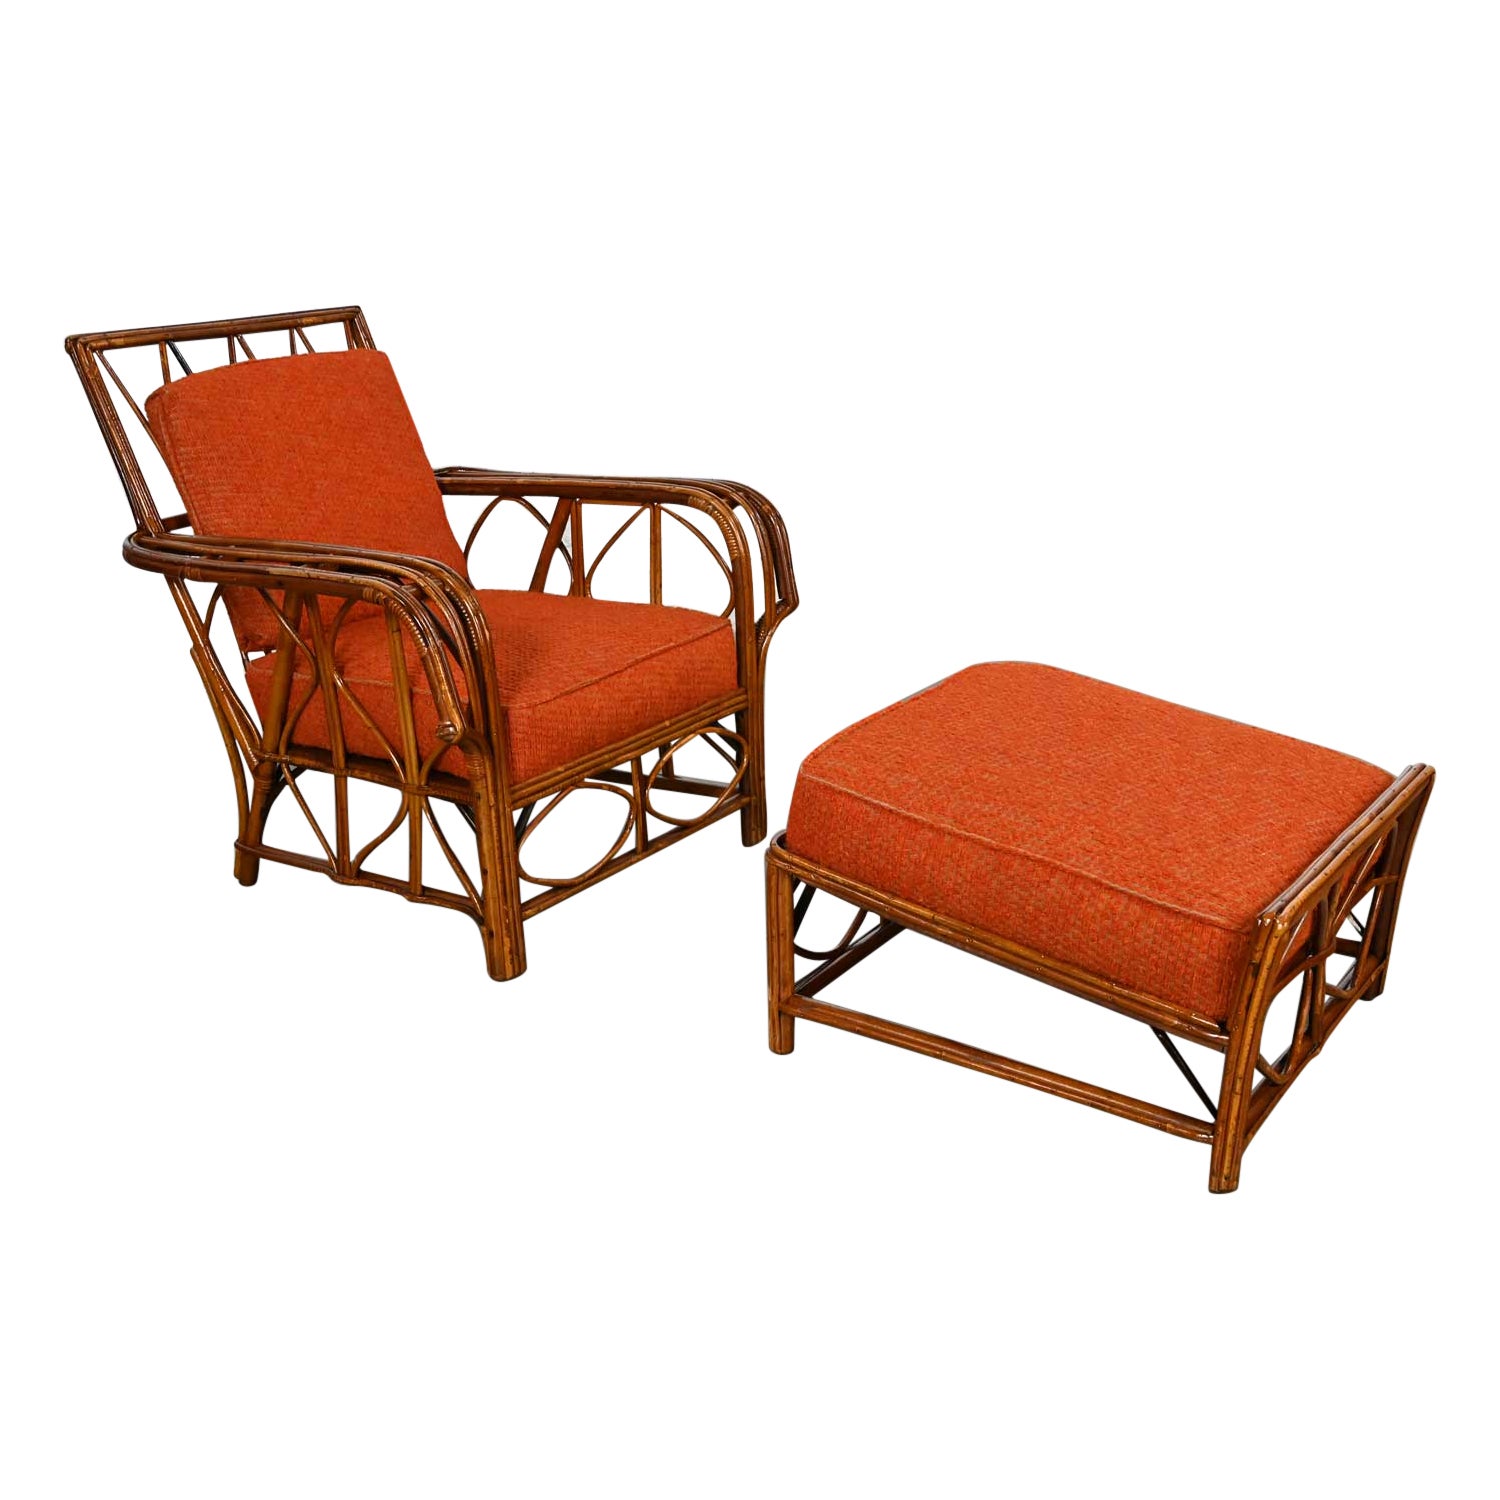 Rattan Lounge Chair & Ottoman Orange Fabric Cushions by Helmers Manufacturing Co